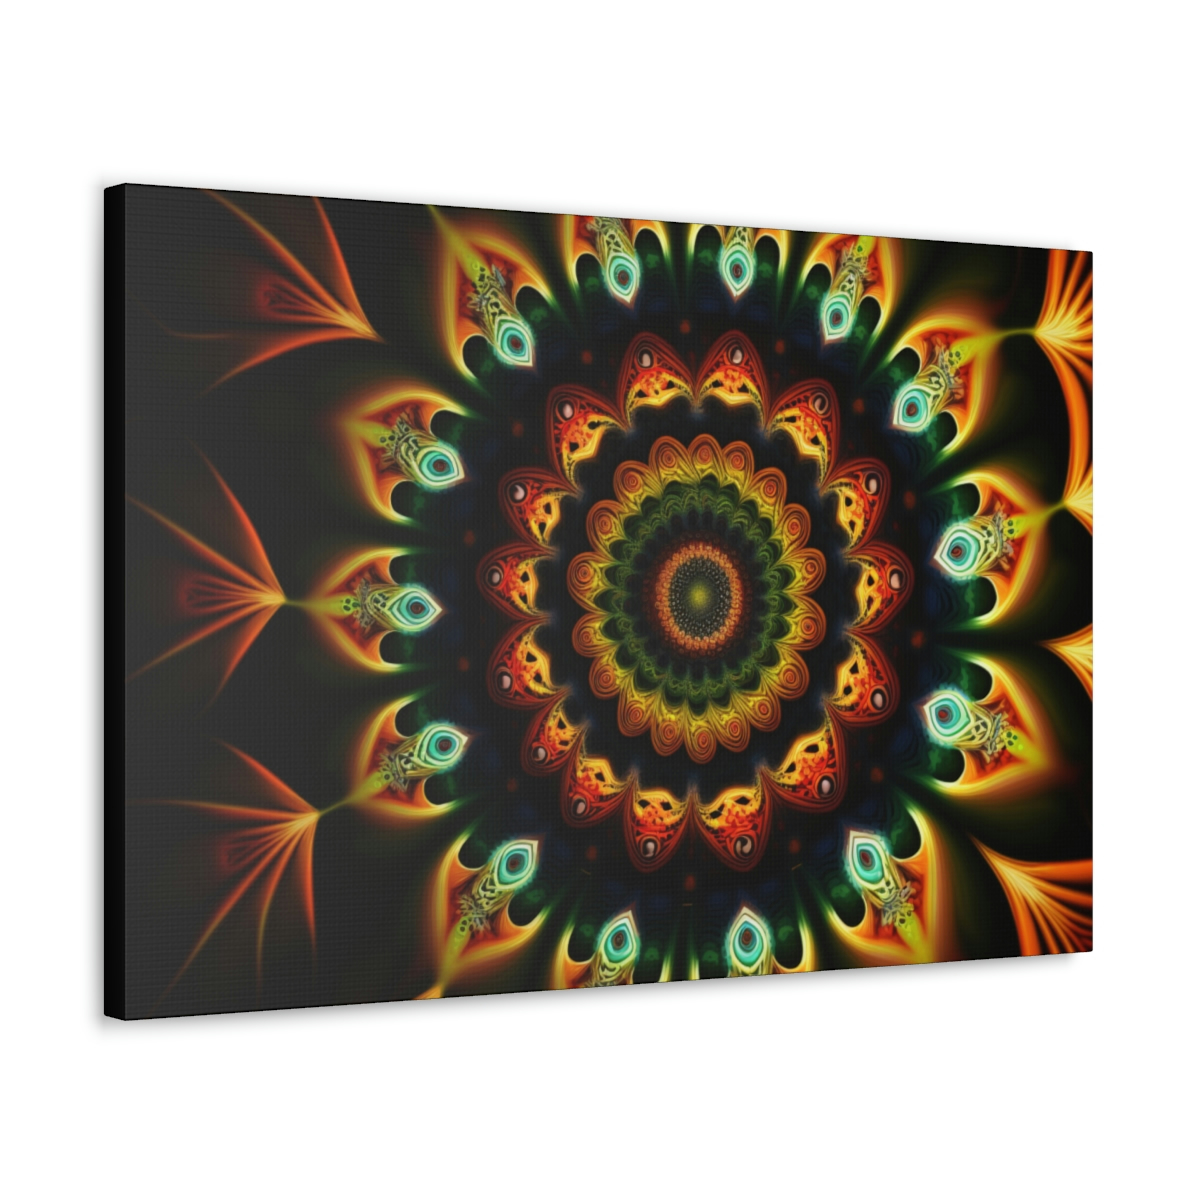 Trippy Art Canvas Print: Messages Of The Gods